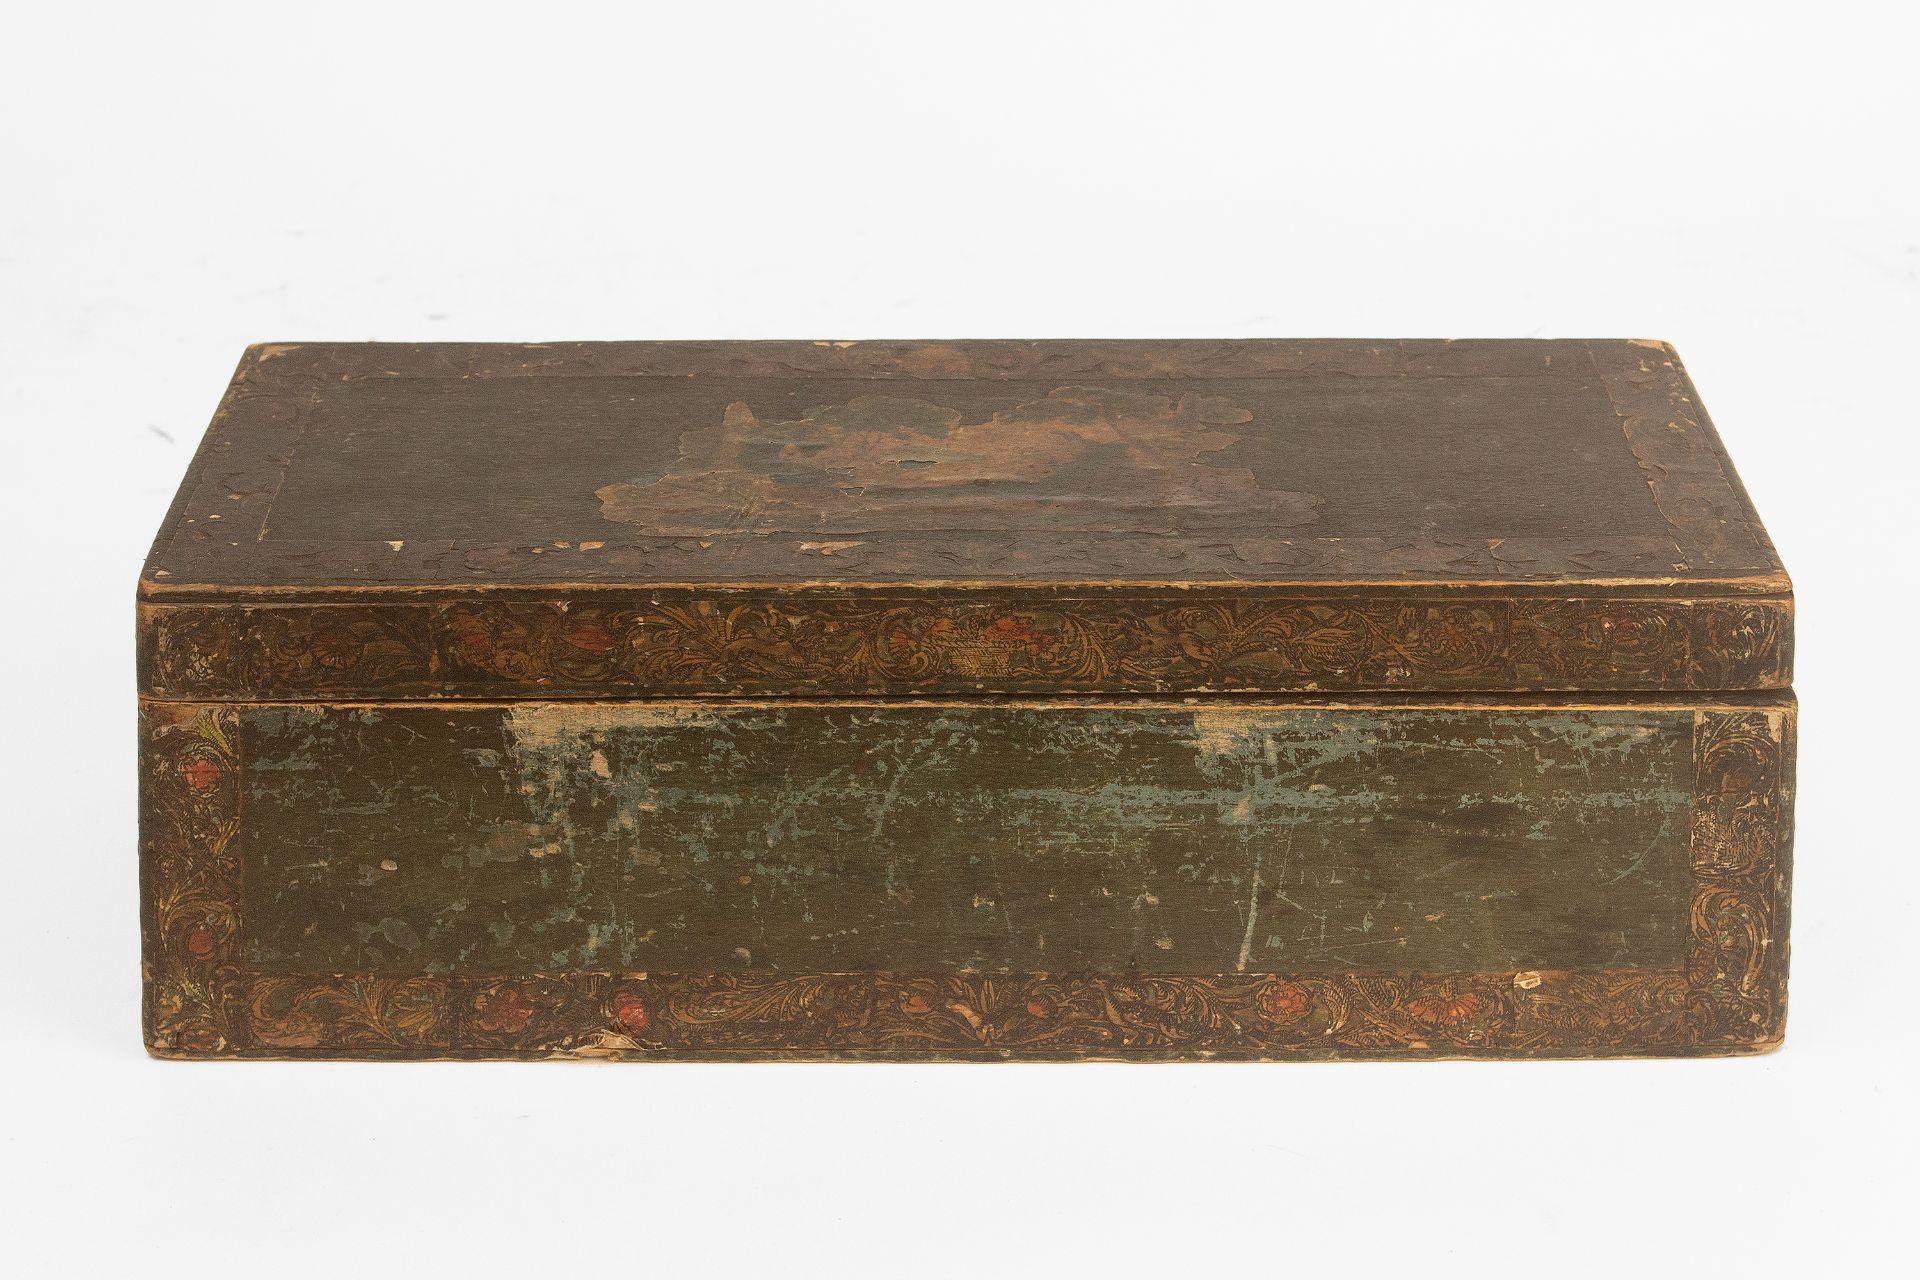 A pair of 19th century lacca povera style European boxes - Image 4 of 6